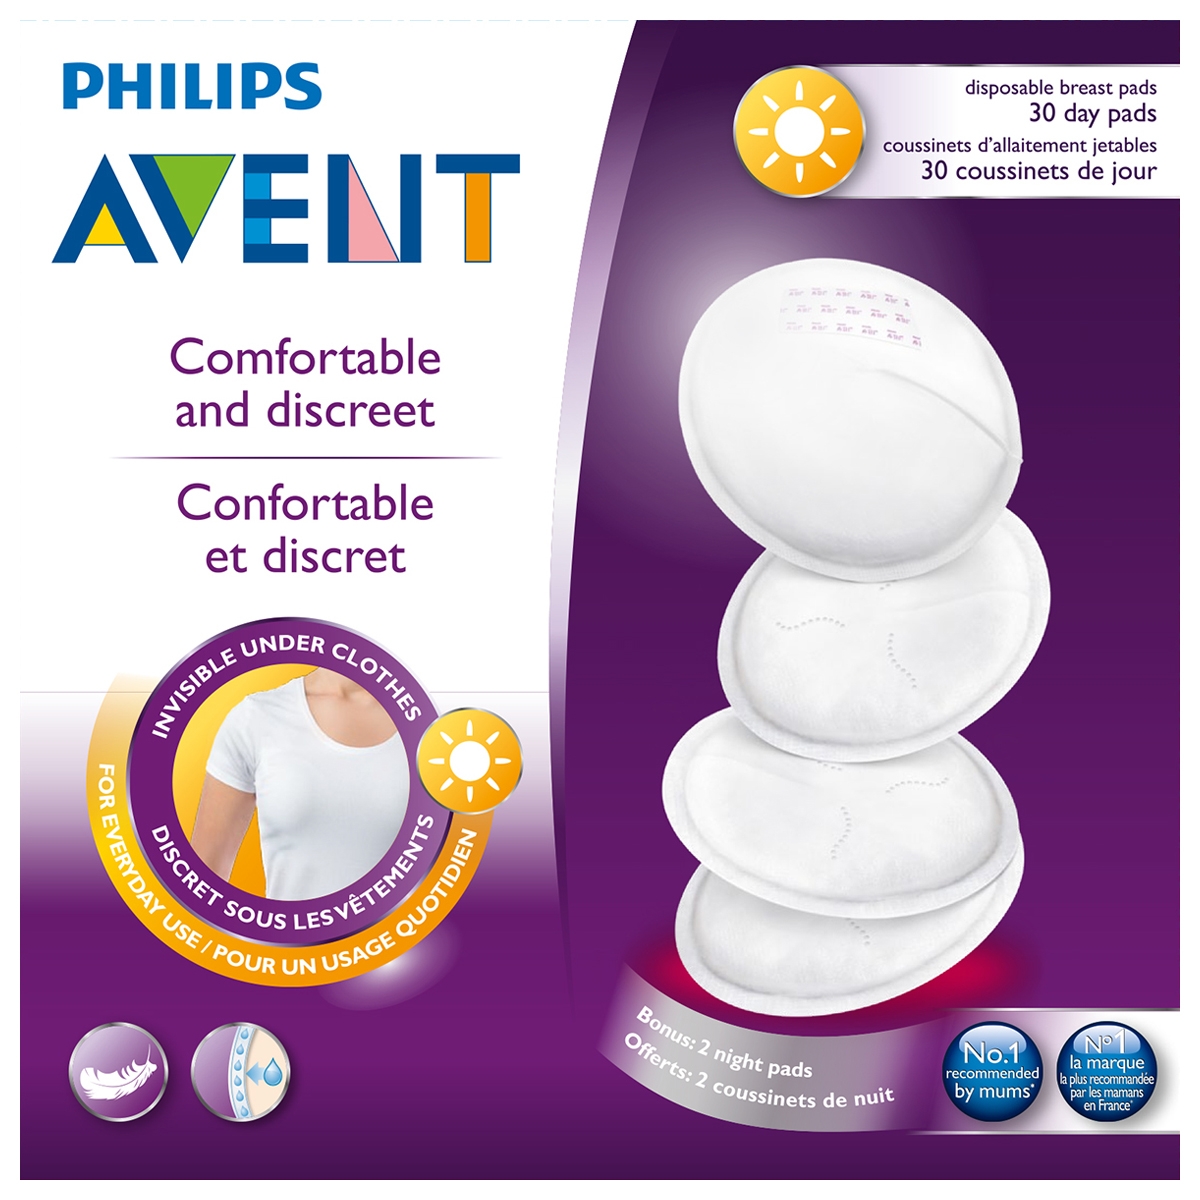 Avent – Disposable Breast Pads